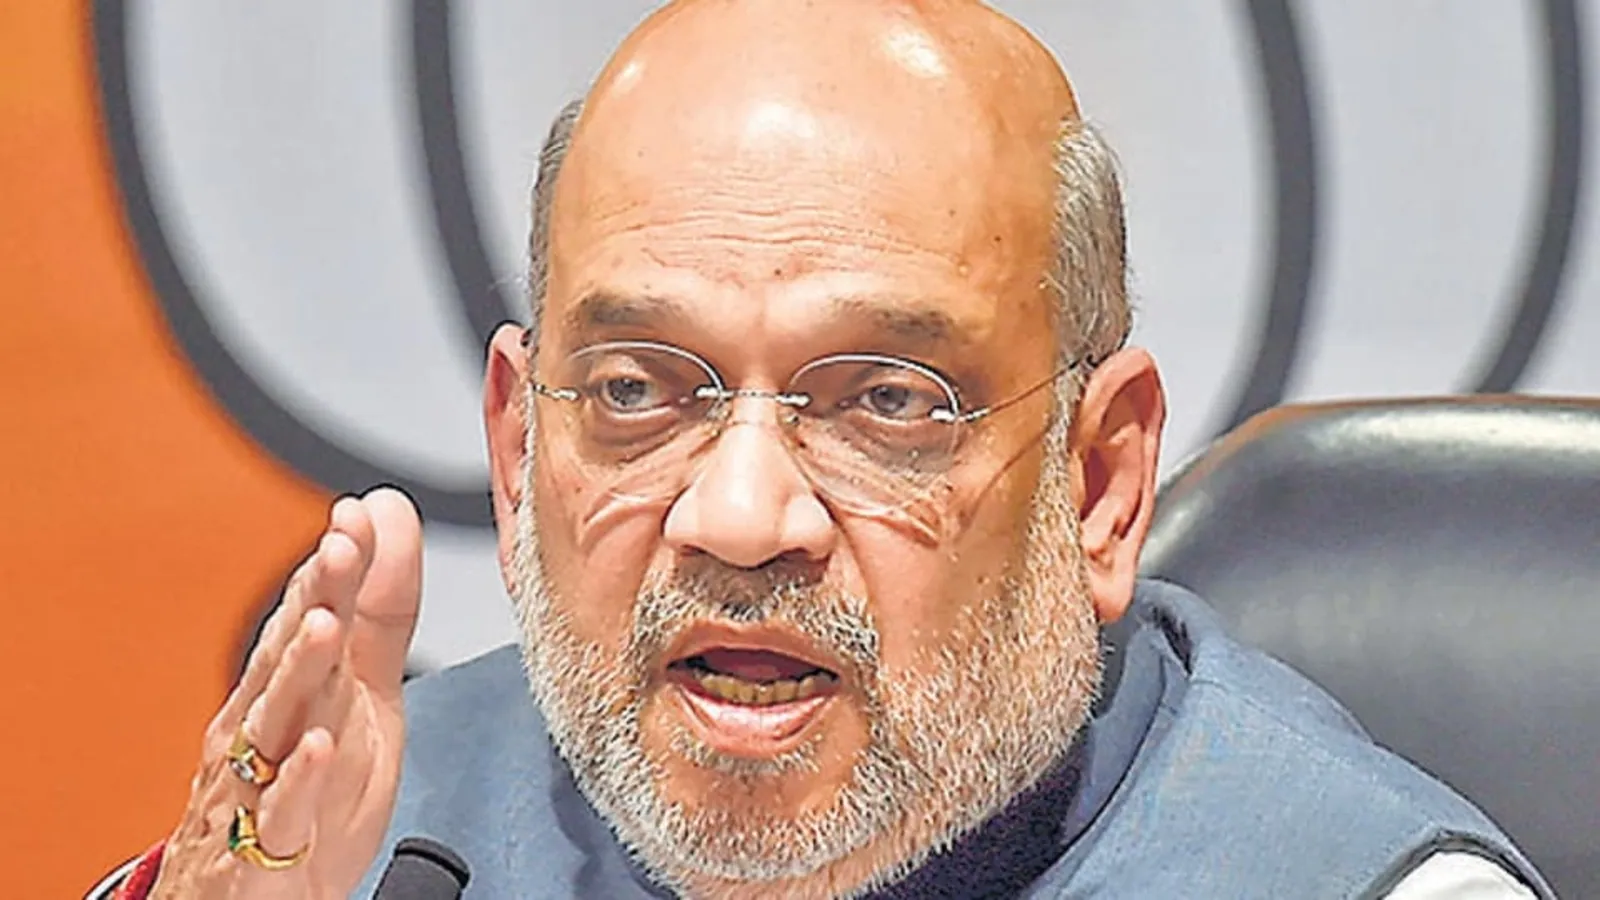 Daily brief: Amit Shah reviews security situation in Jammu and Kashmir, and all the latest news